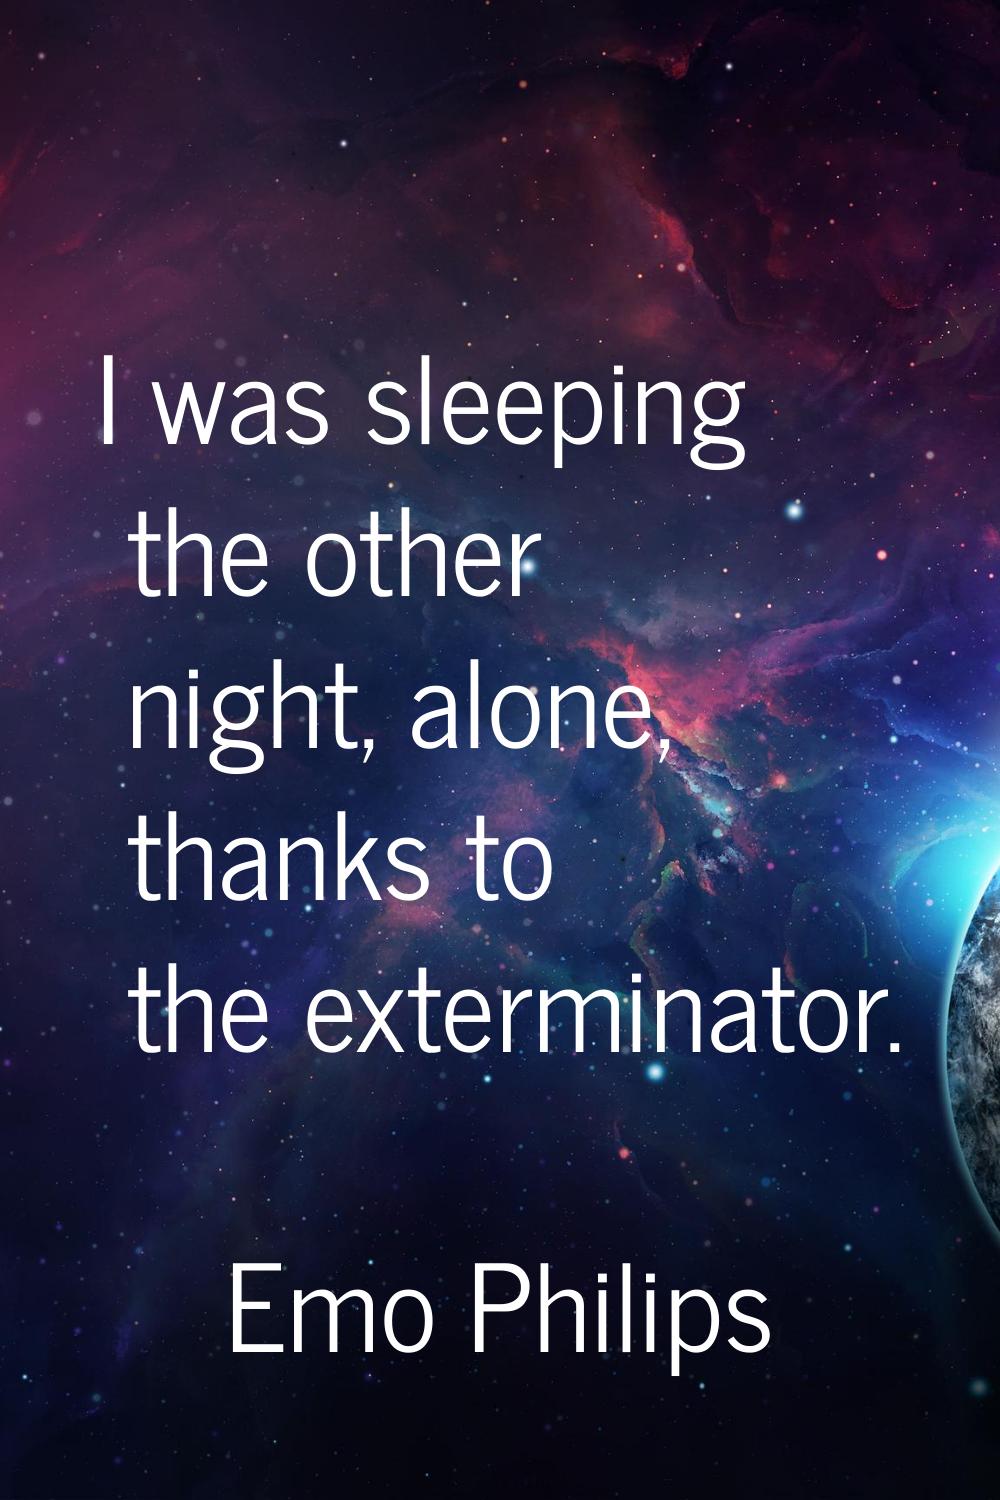 I was sleeping the other night, alone, thanks to the exterminator.